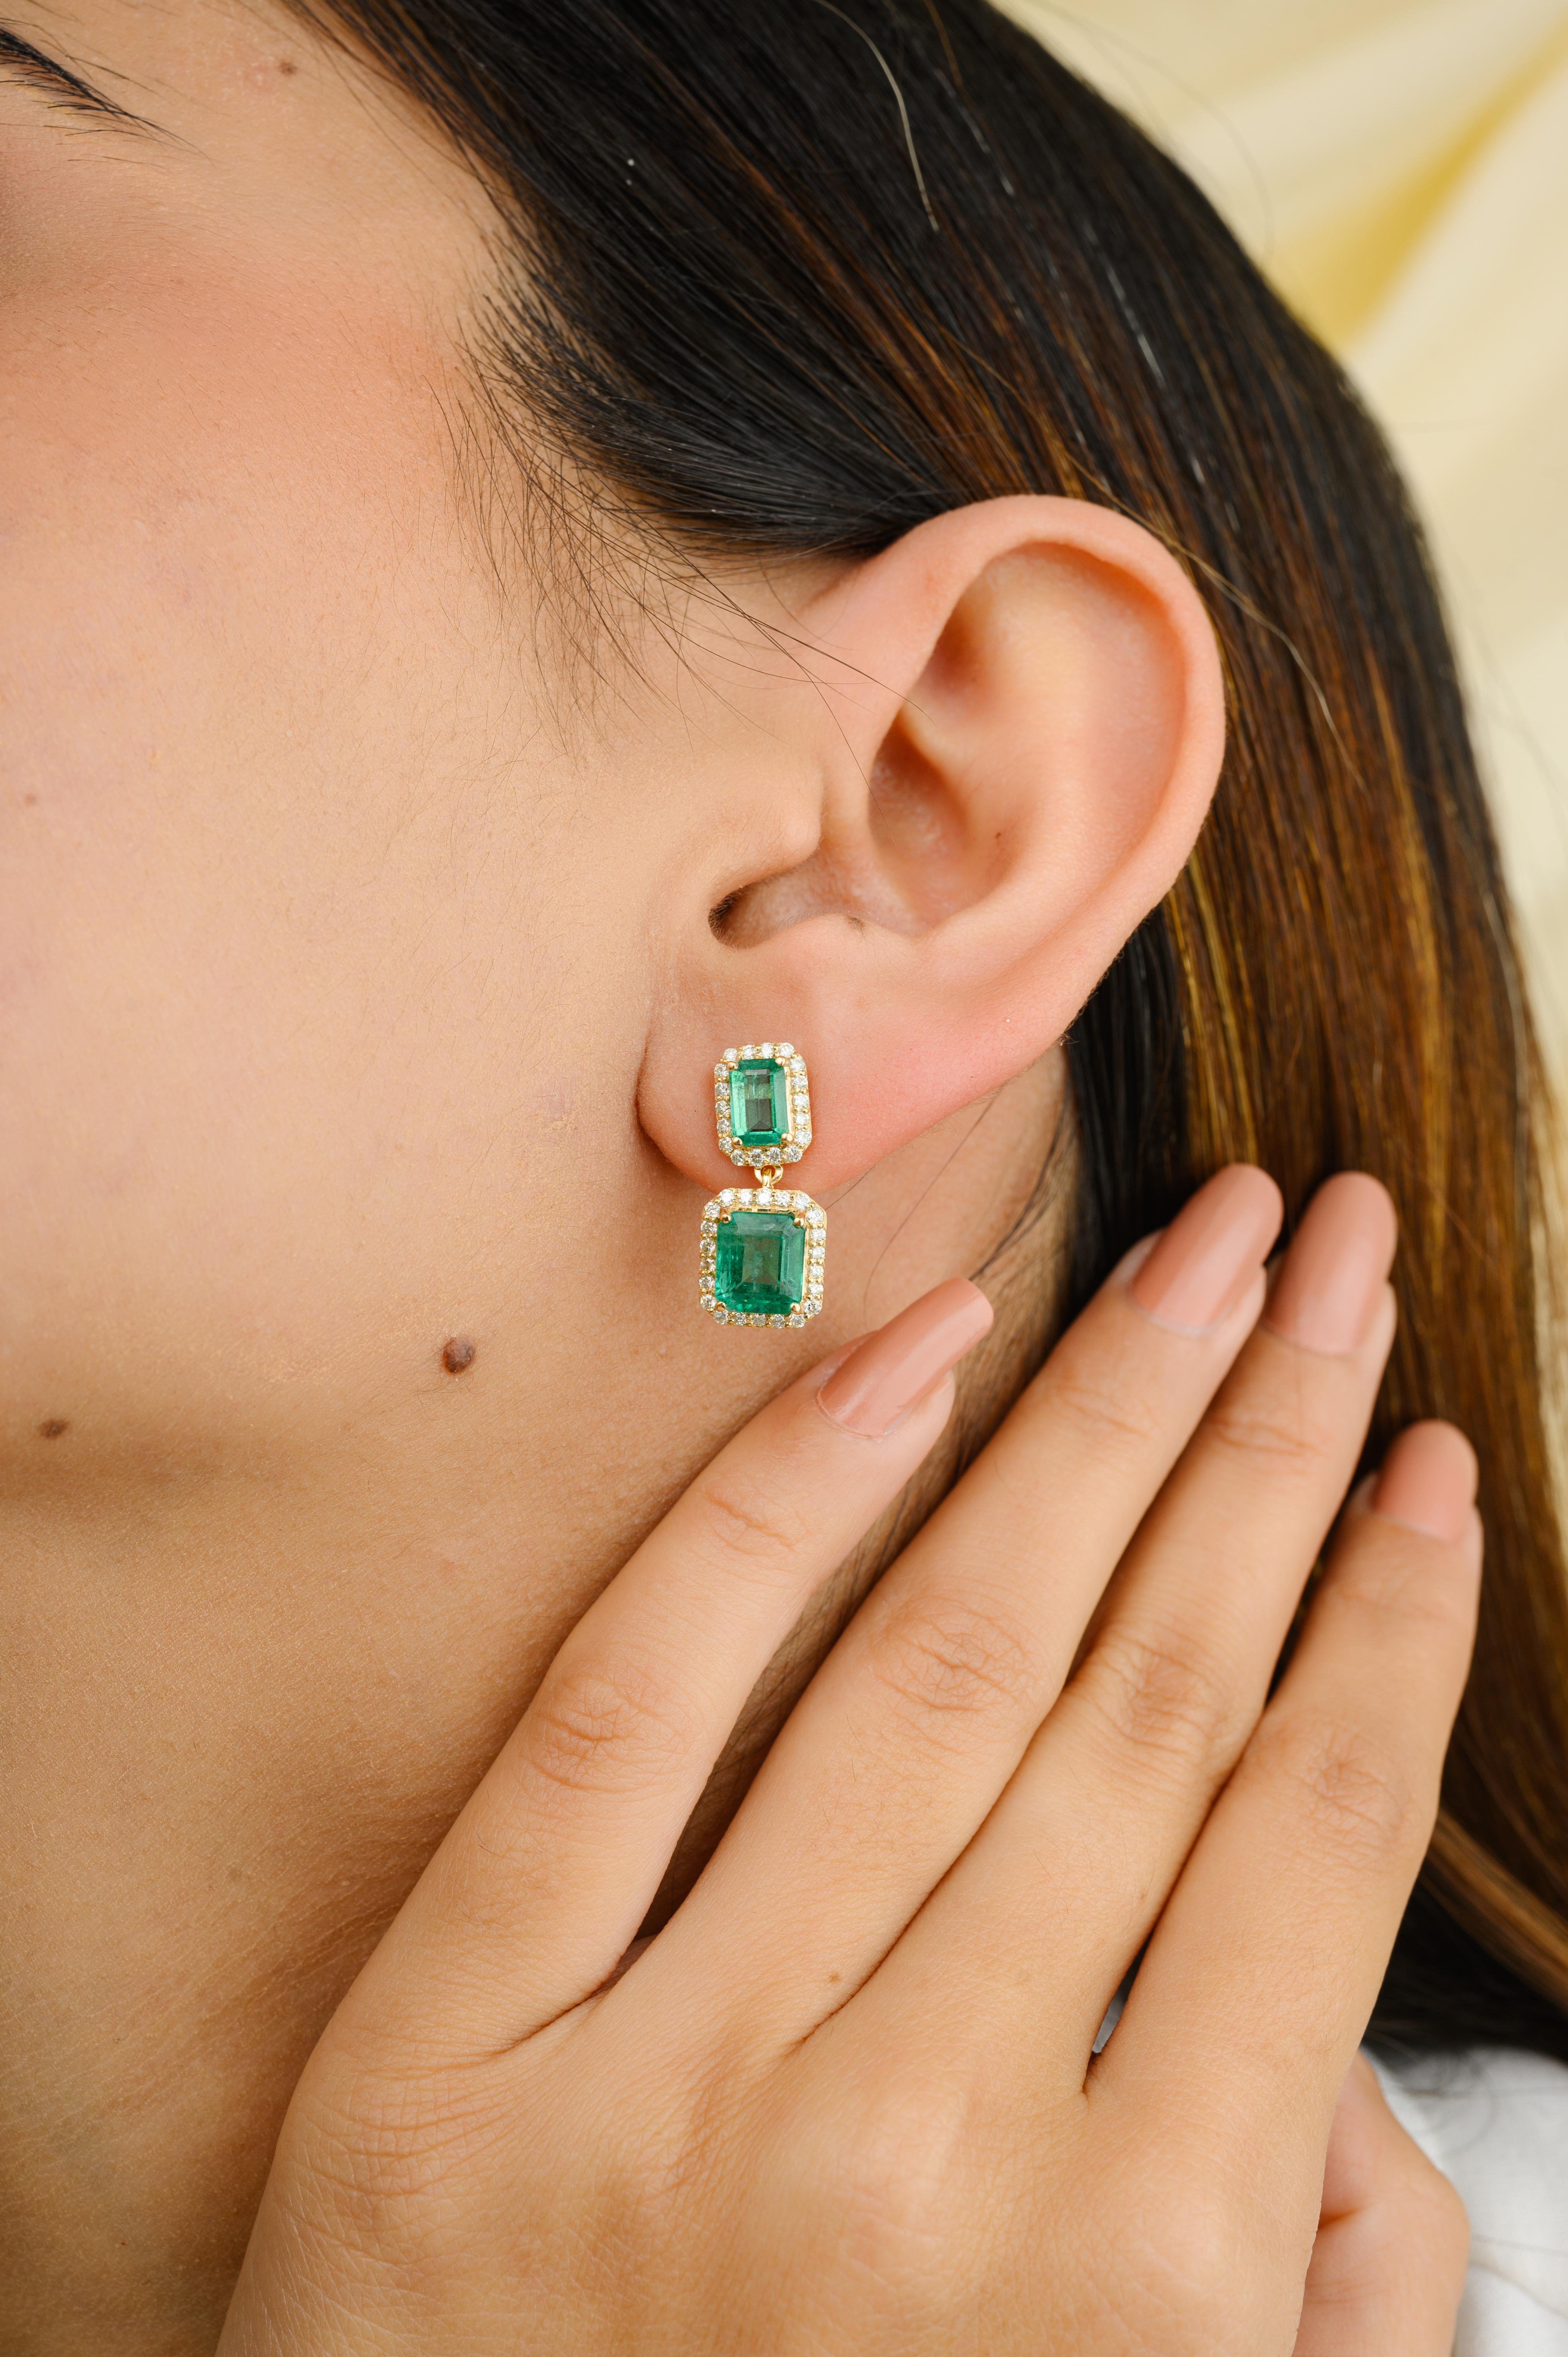 Regal Emerald and Diamond Engagement Dangle Earrings in 18K Gold to make a statement with your look. You shall need dangle earrings to make a statement with your look. These earrings create a sparkling, luxurious look featuring octagon cut emerald